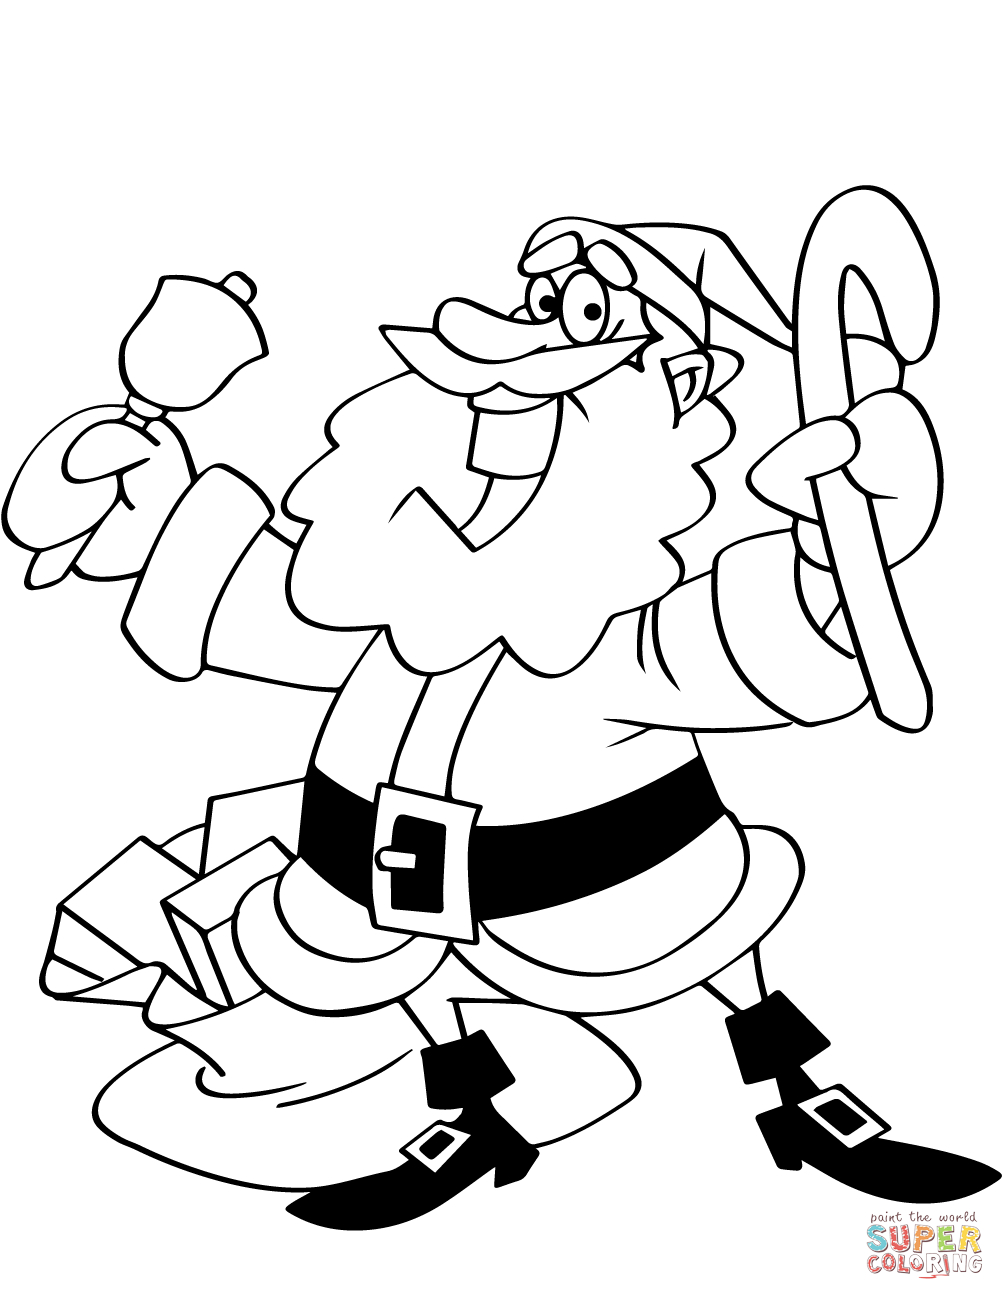 Coloring Pages Online To Print Coloring Books Free Santa Coloring Pages Online Print For Kids